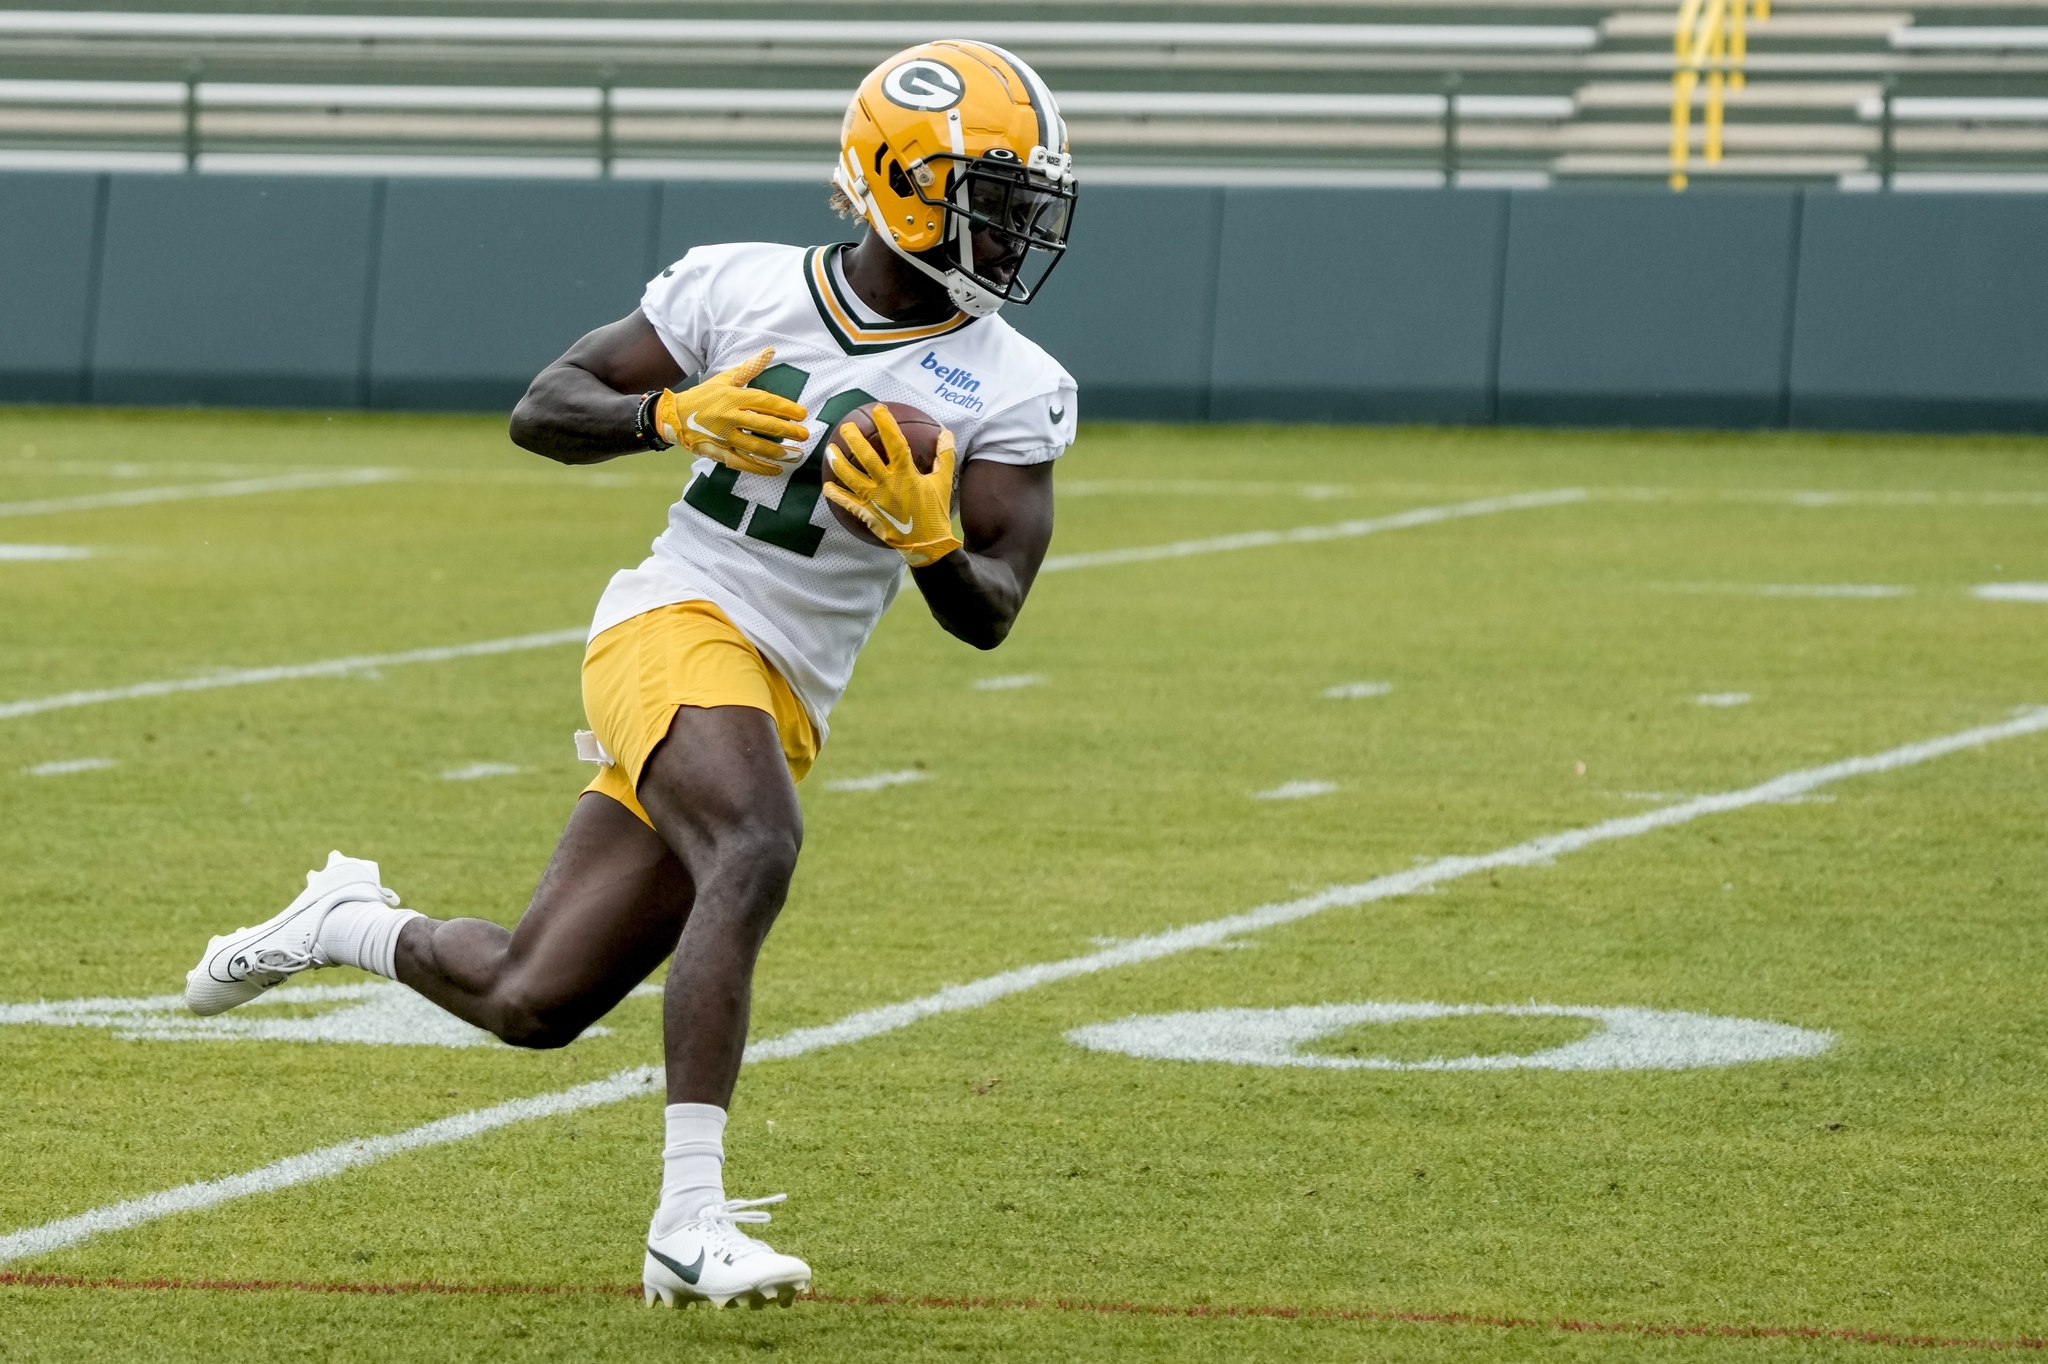 Jayden Reed Fantasy Football: Is the Green Bay Packers WR a good pick for your team?